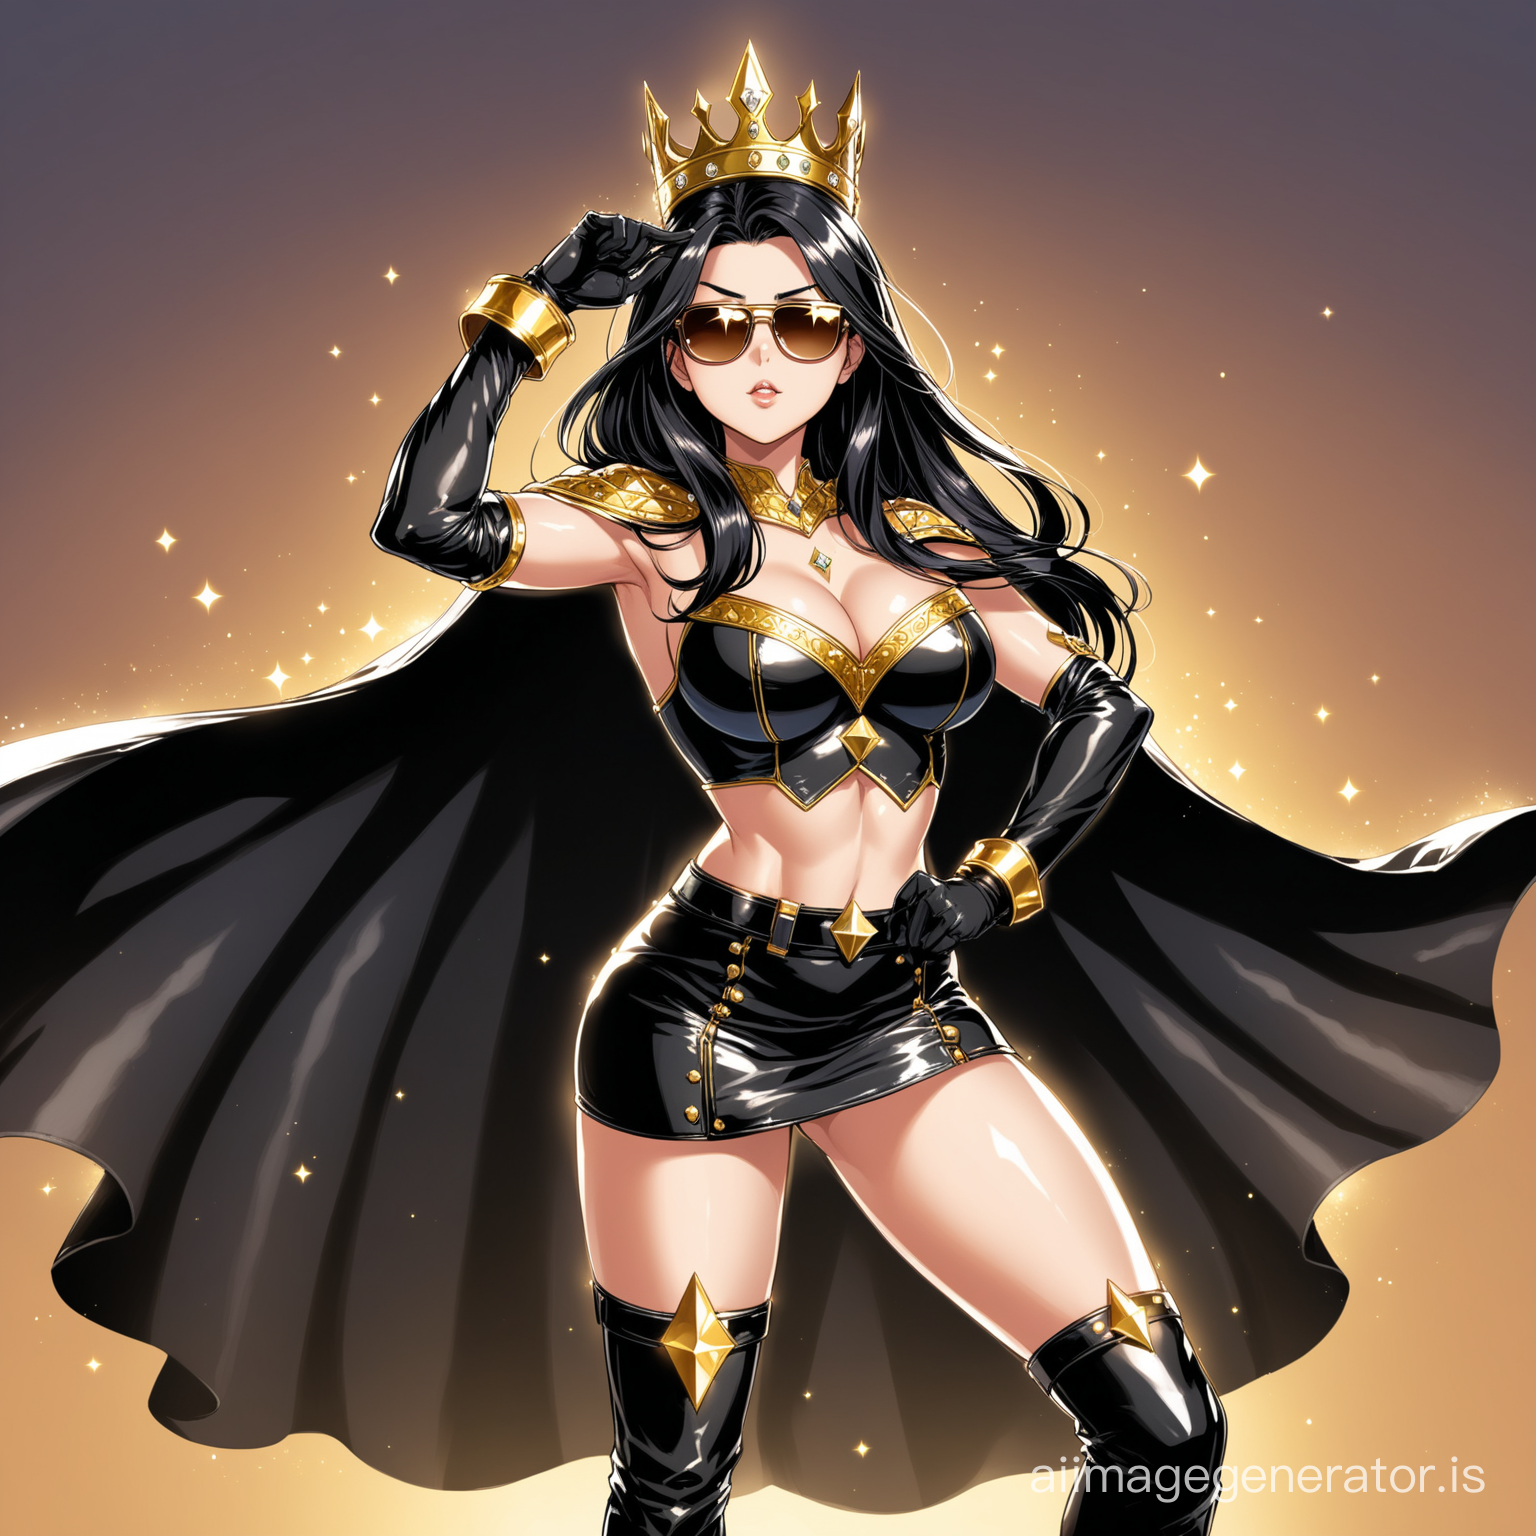 hot anime girl having long and beautiful black hair wearing a black leather skirt, a cute croptop, a black superhero cape reaching her feet, a pair of leather boots, gloves and a pair of cool shades. she looks royal by wearing a golden crown embedded with diamonds. she gives a really sexy pose